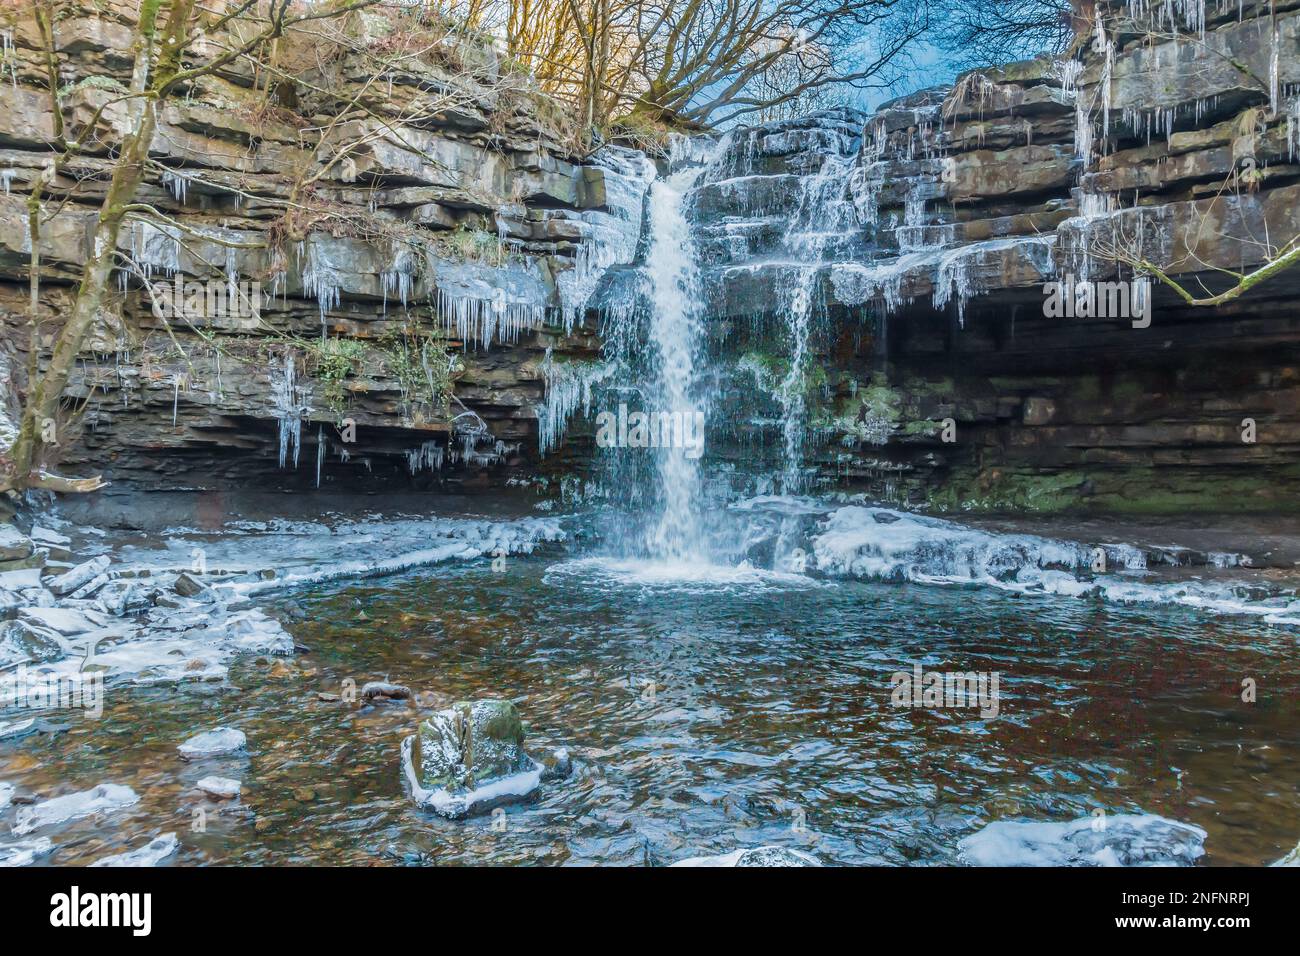 A 3-shot HDR image of a very cold and icy Summerhill Force Waterfall and Gibson's Cave. Stock Photo